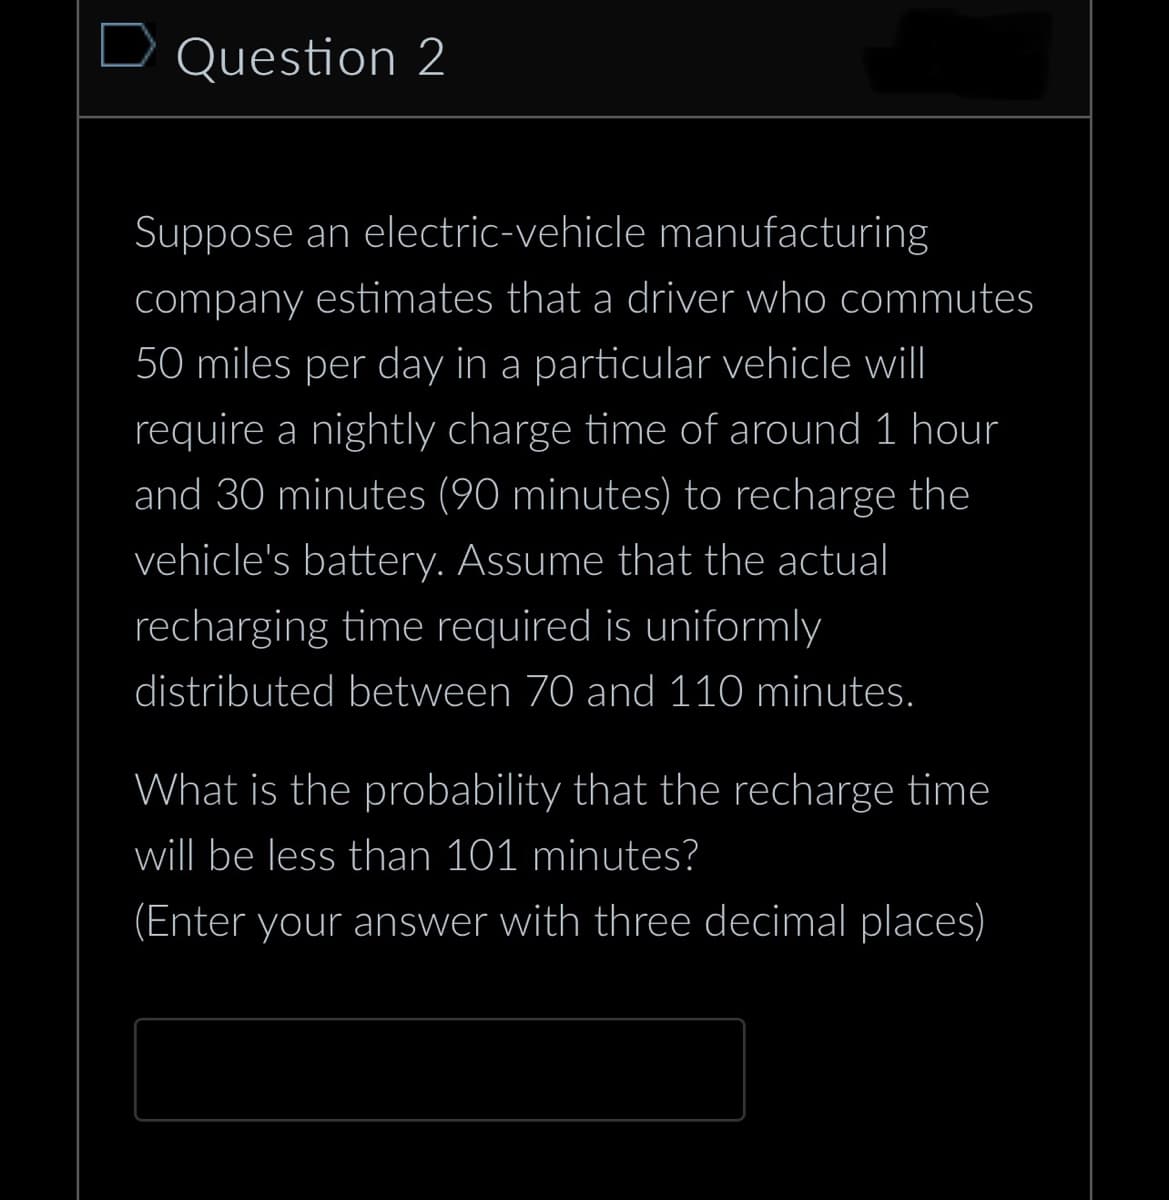 D Question 2
Suppose an electric-vehicle manufacturing
company estimates that a driver who commutes
50 miles per day in a particular vehicle will
require a nightly charge time of around 1 hour
and 30 minutes (90 minutes) to recharge the
vehicle's battery. Assume that the actual
recharging time required is uniformly
distributed between 70 and 110 minutes.
What is the probability that the recharge time
will be less than 101 minutes?
(Enter your answer with three decimal places)